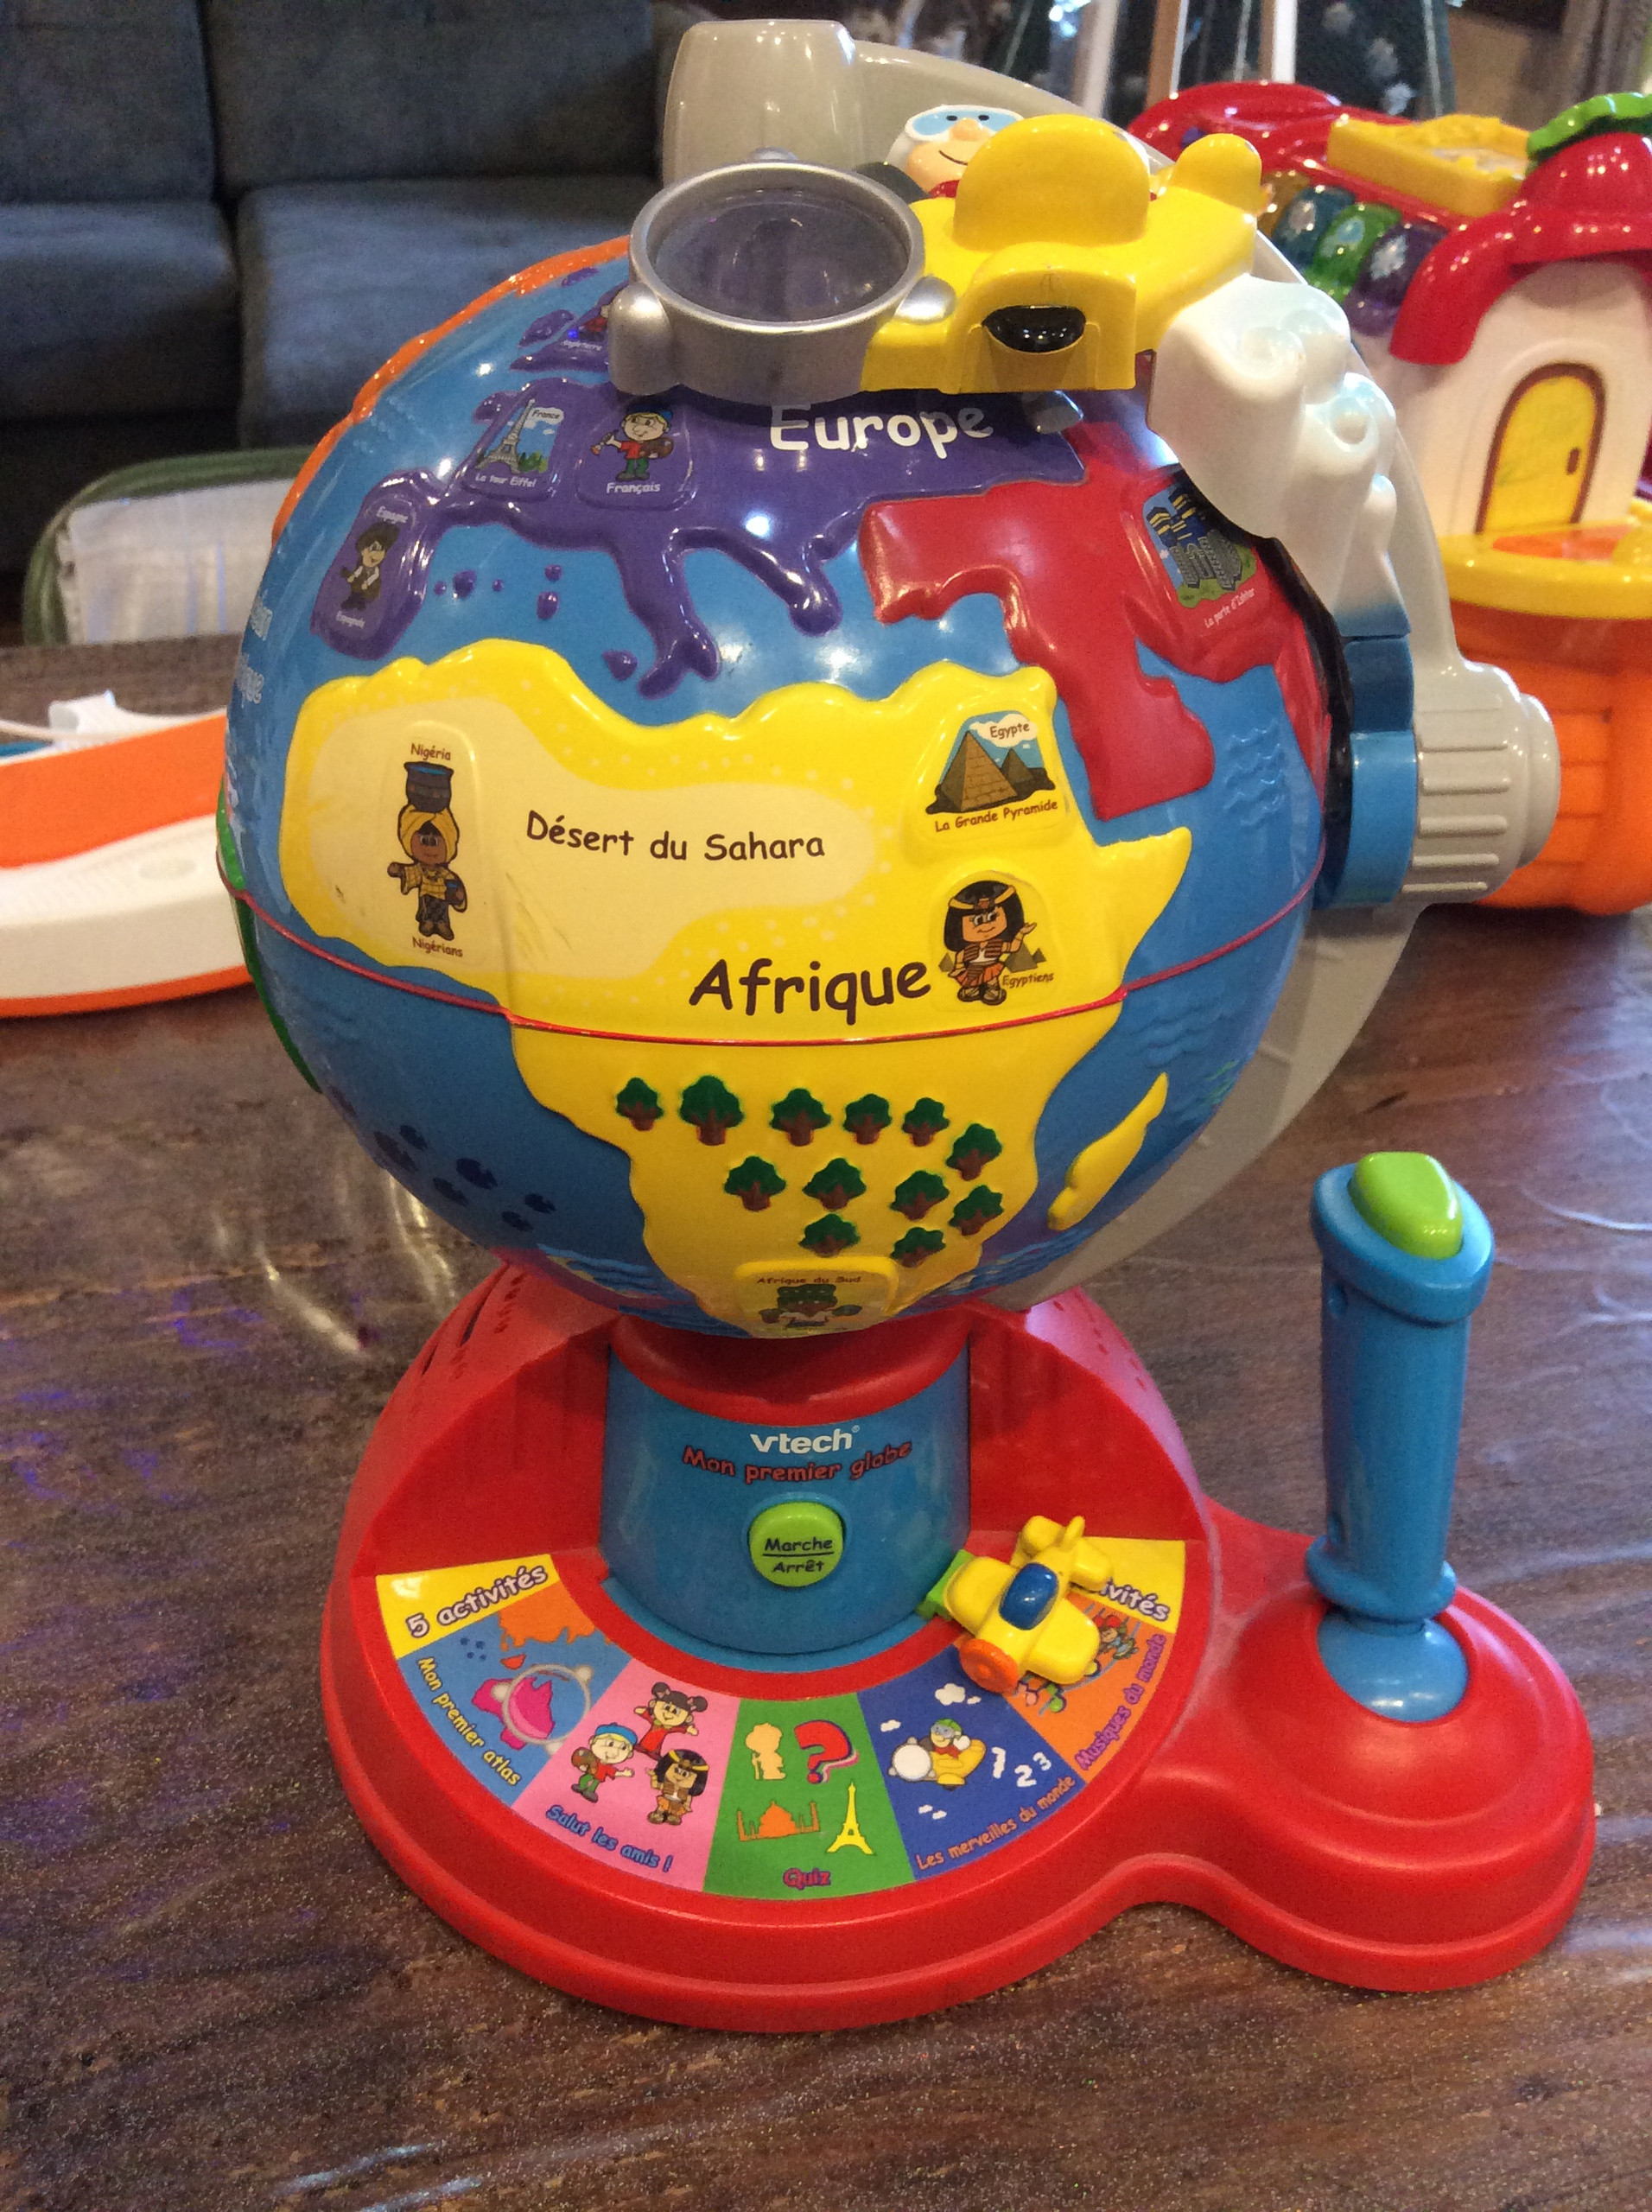 Buy VTech Fly and Learn Globe Online Mauritius